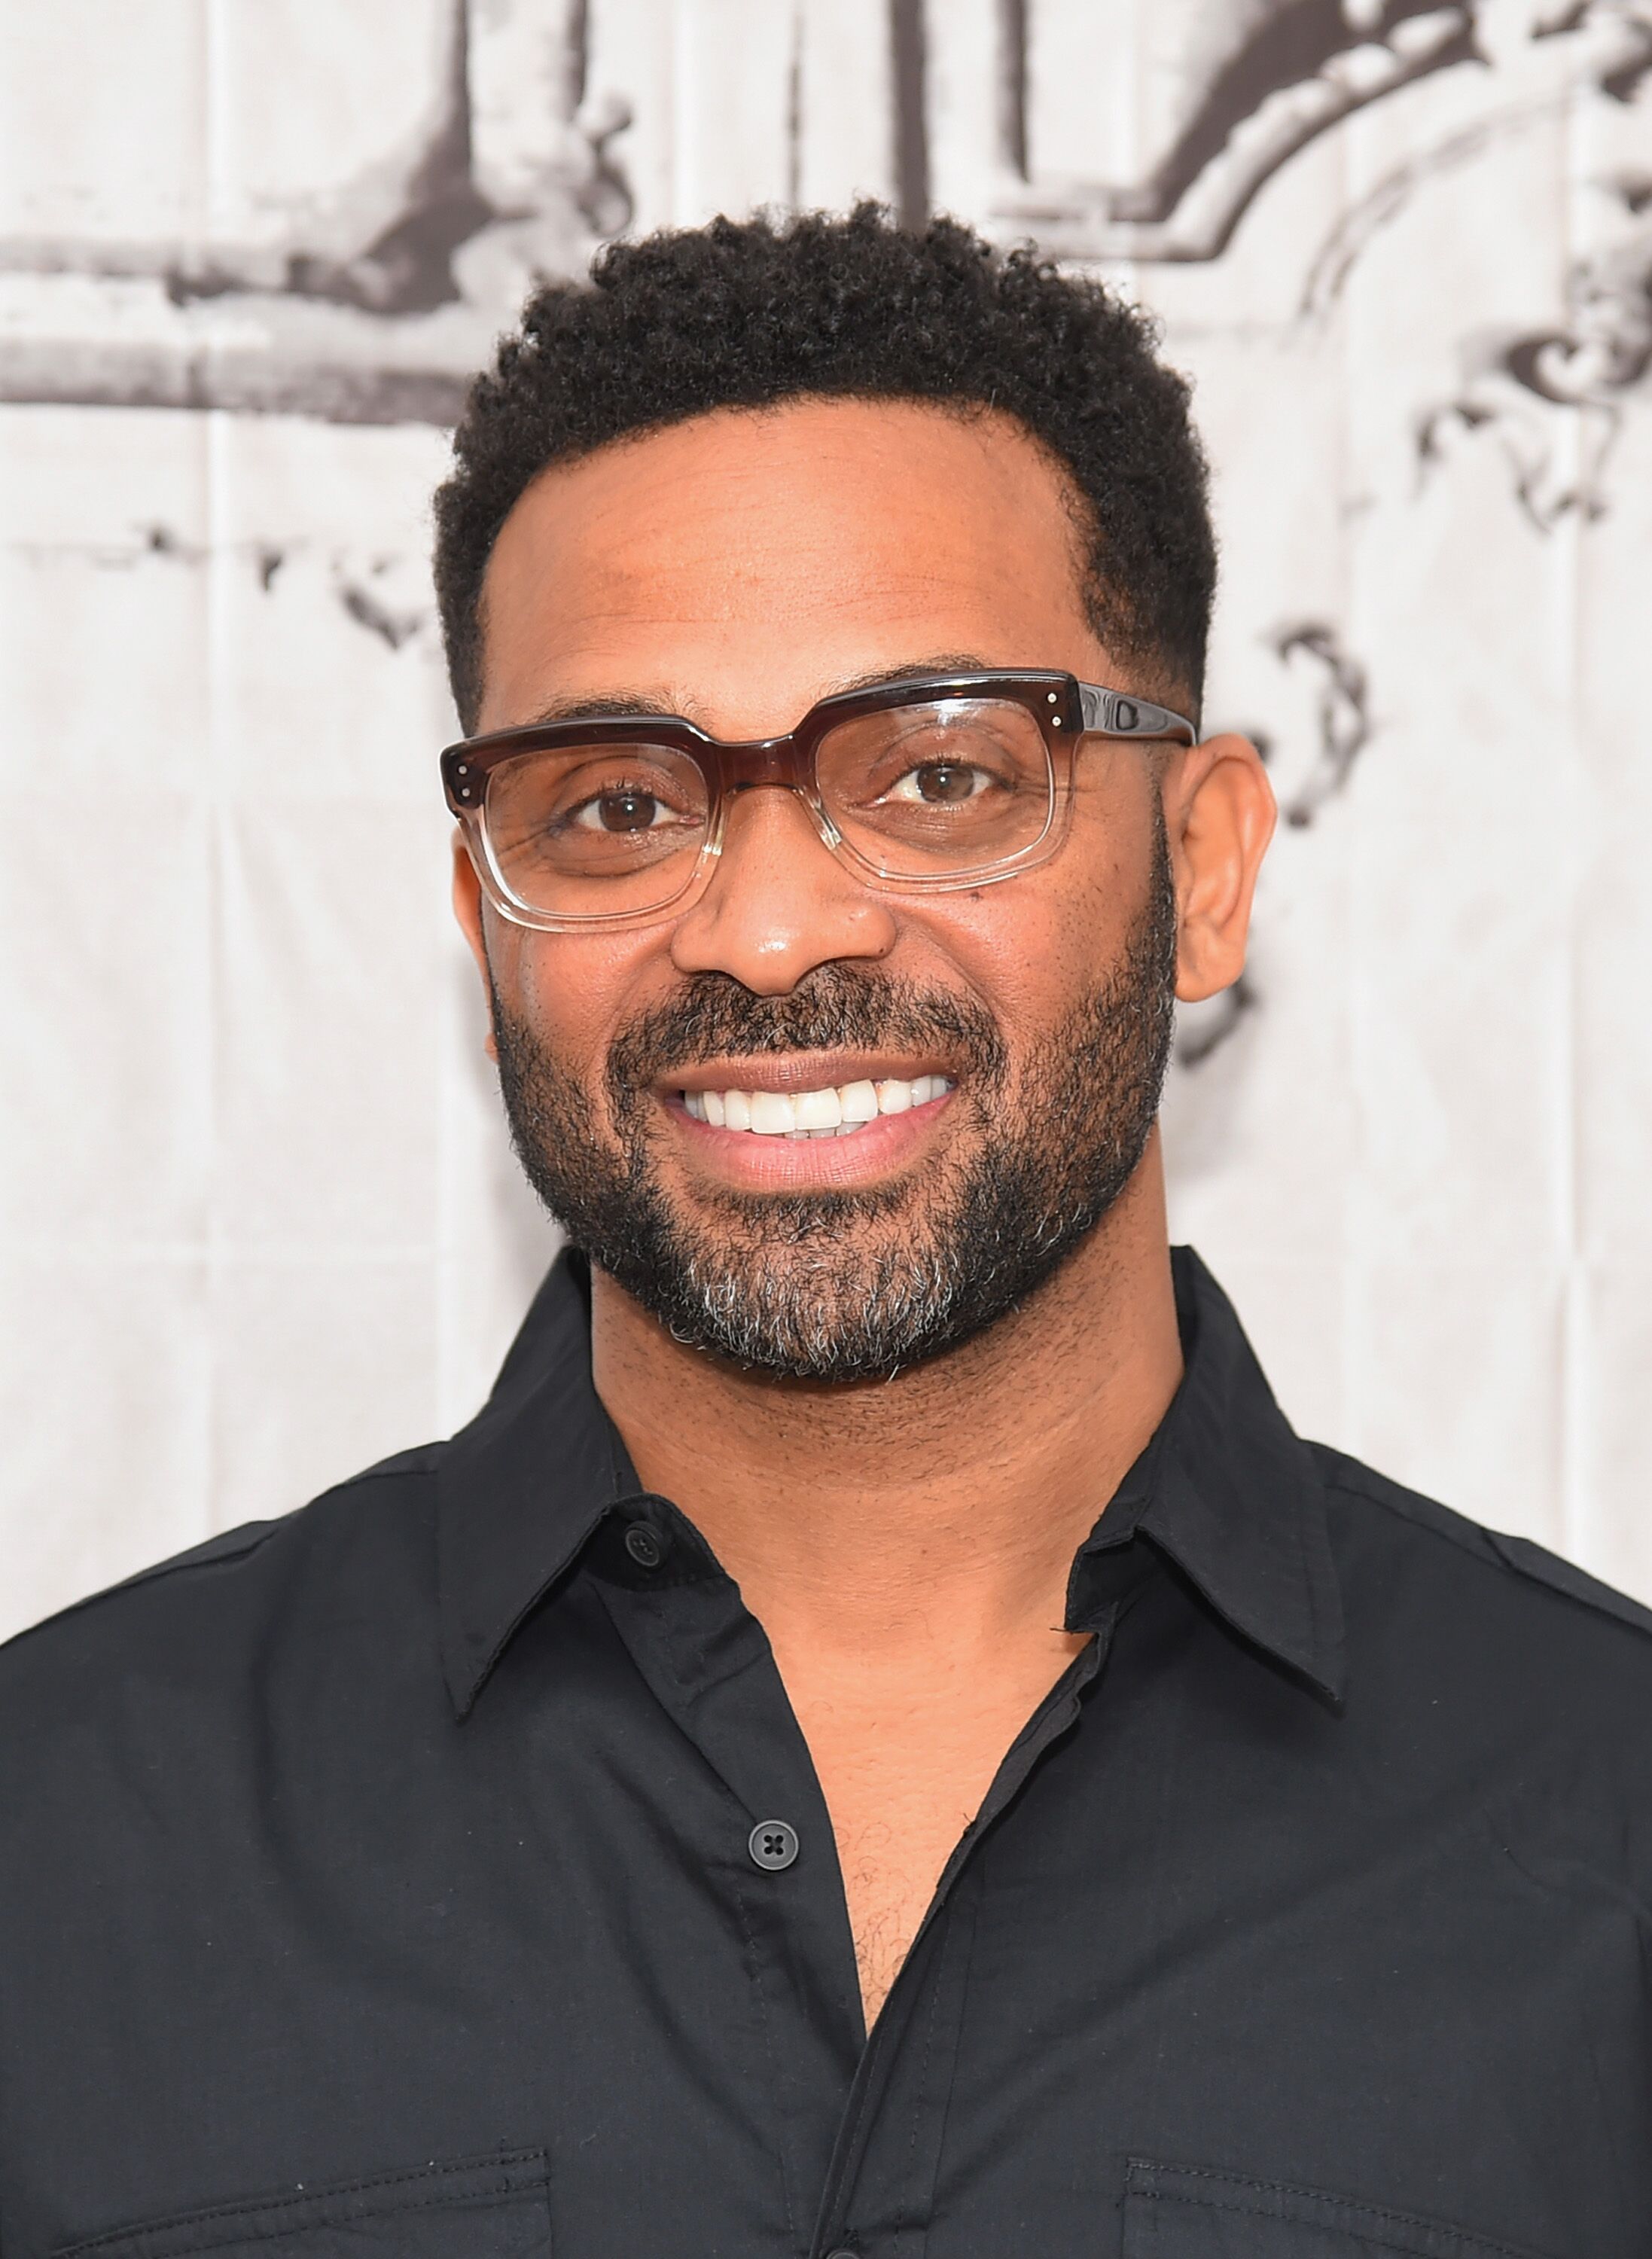 Actor/comedian Mike Epps attends the AOL BUILD Speaker Series Presents: "Survivor's Remorse" at AOL Studios in New York on July 29, 2015 | Photo: Getty Images